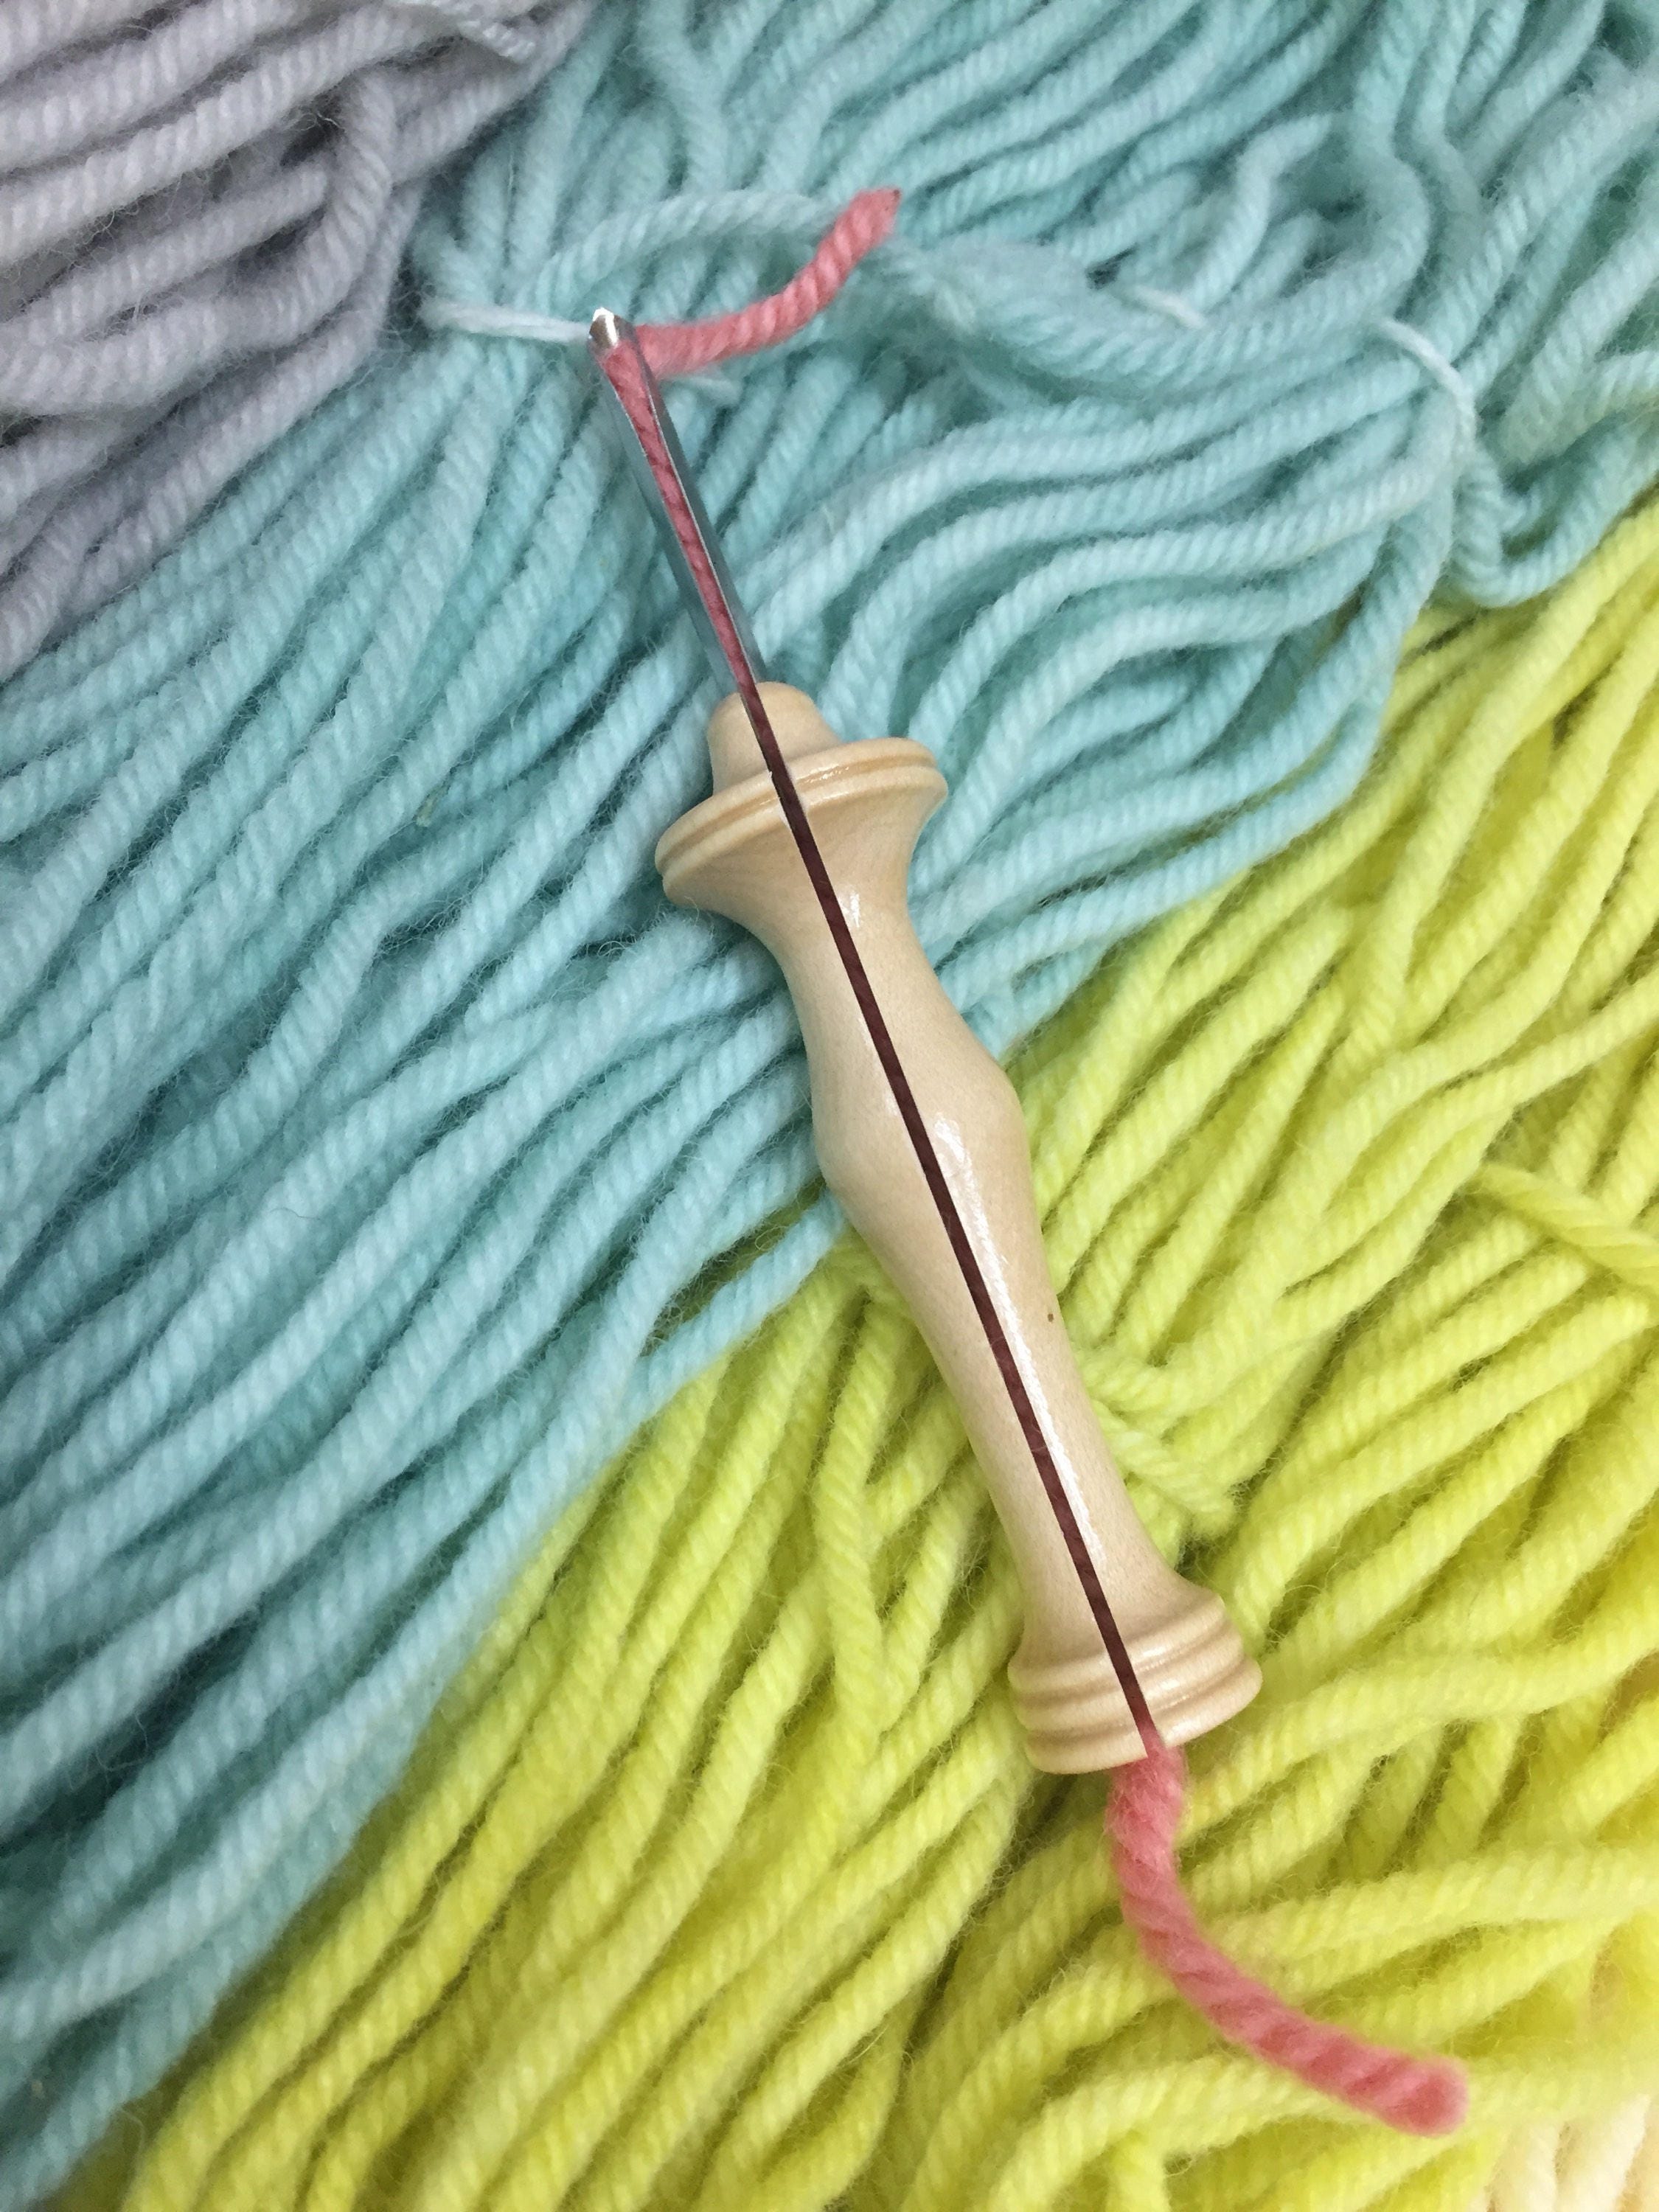 Oxford Punch Needle #14 - The Mini